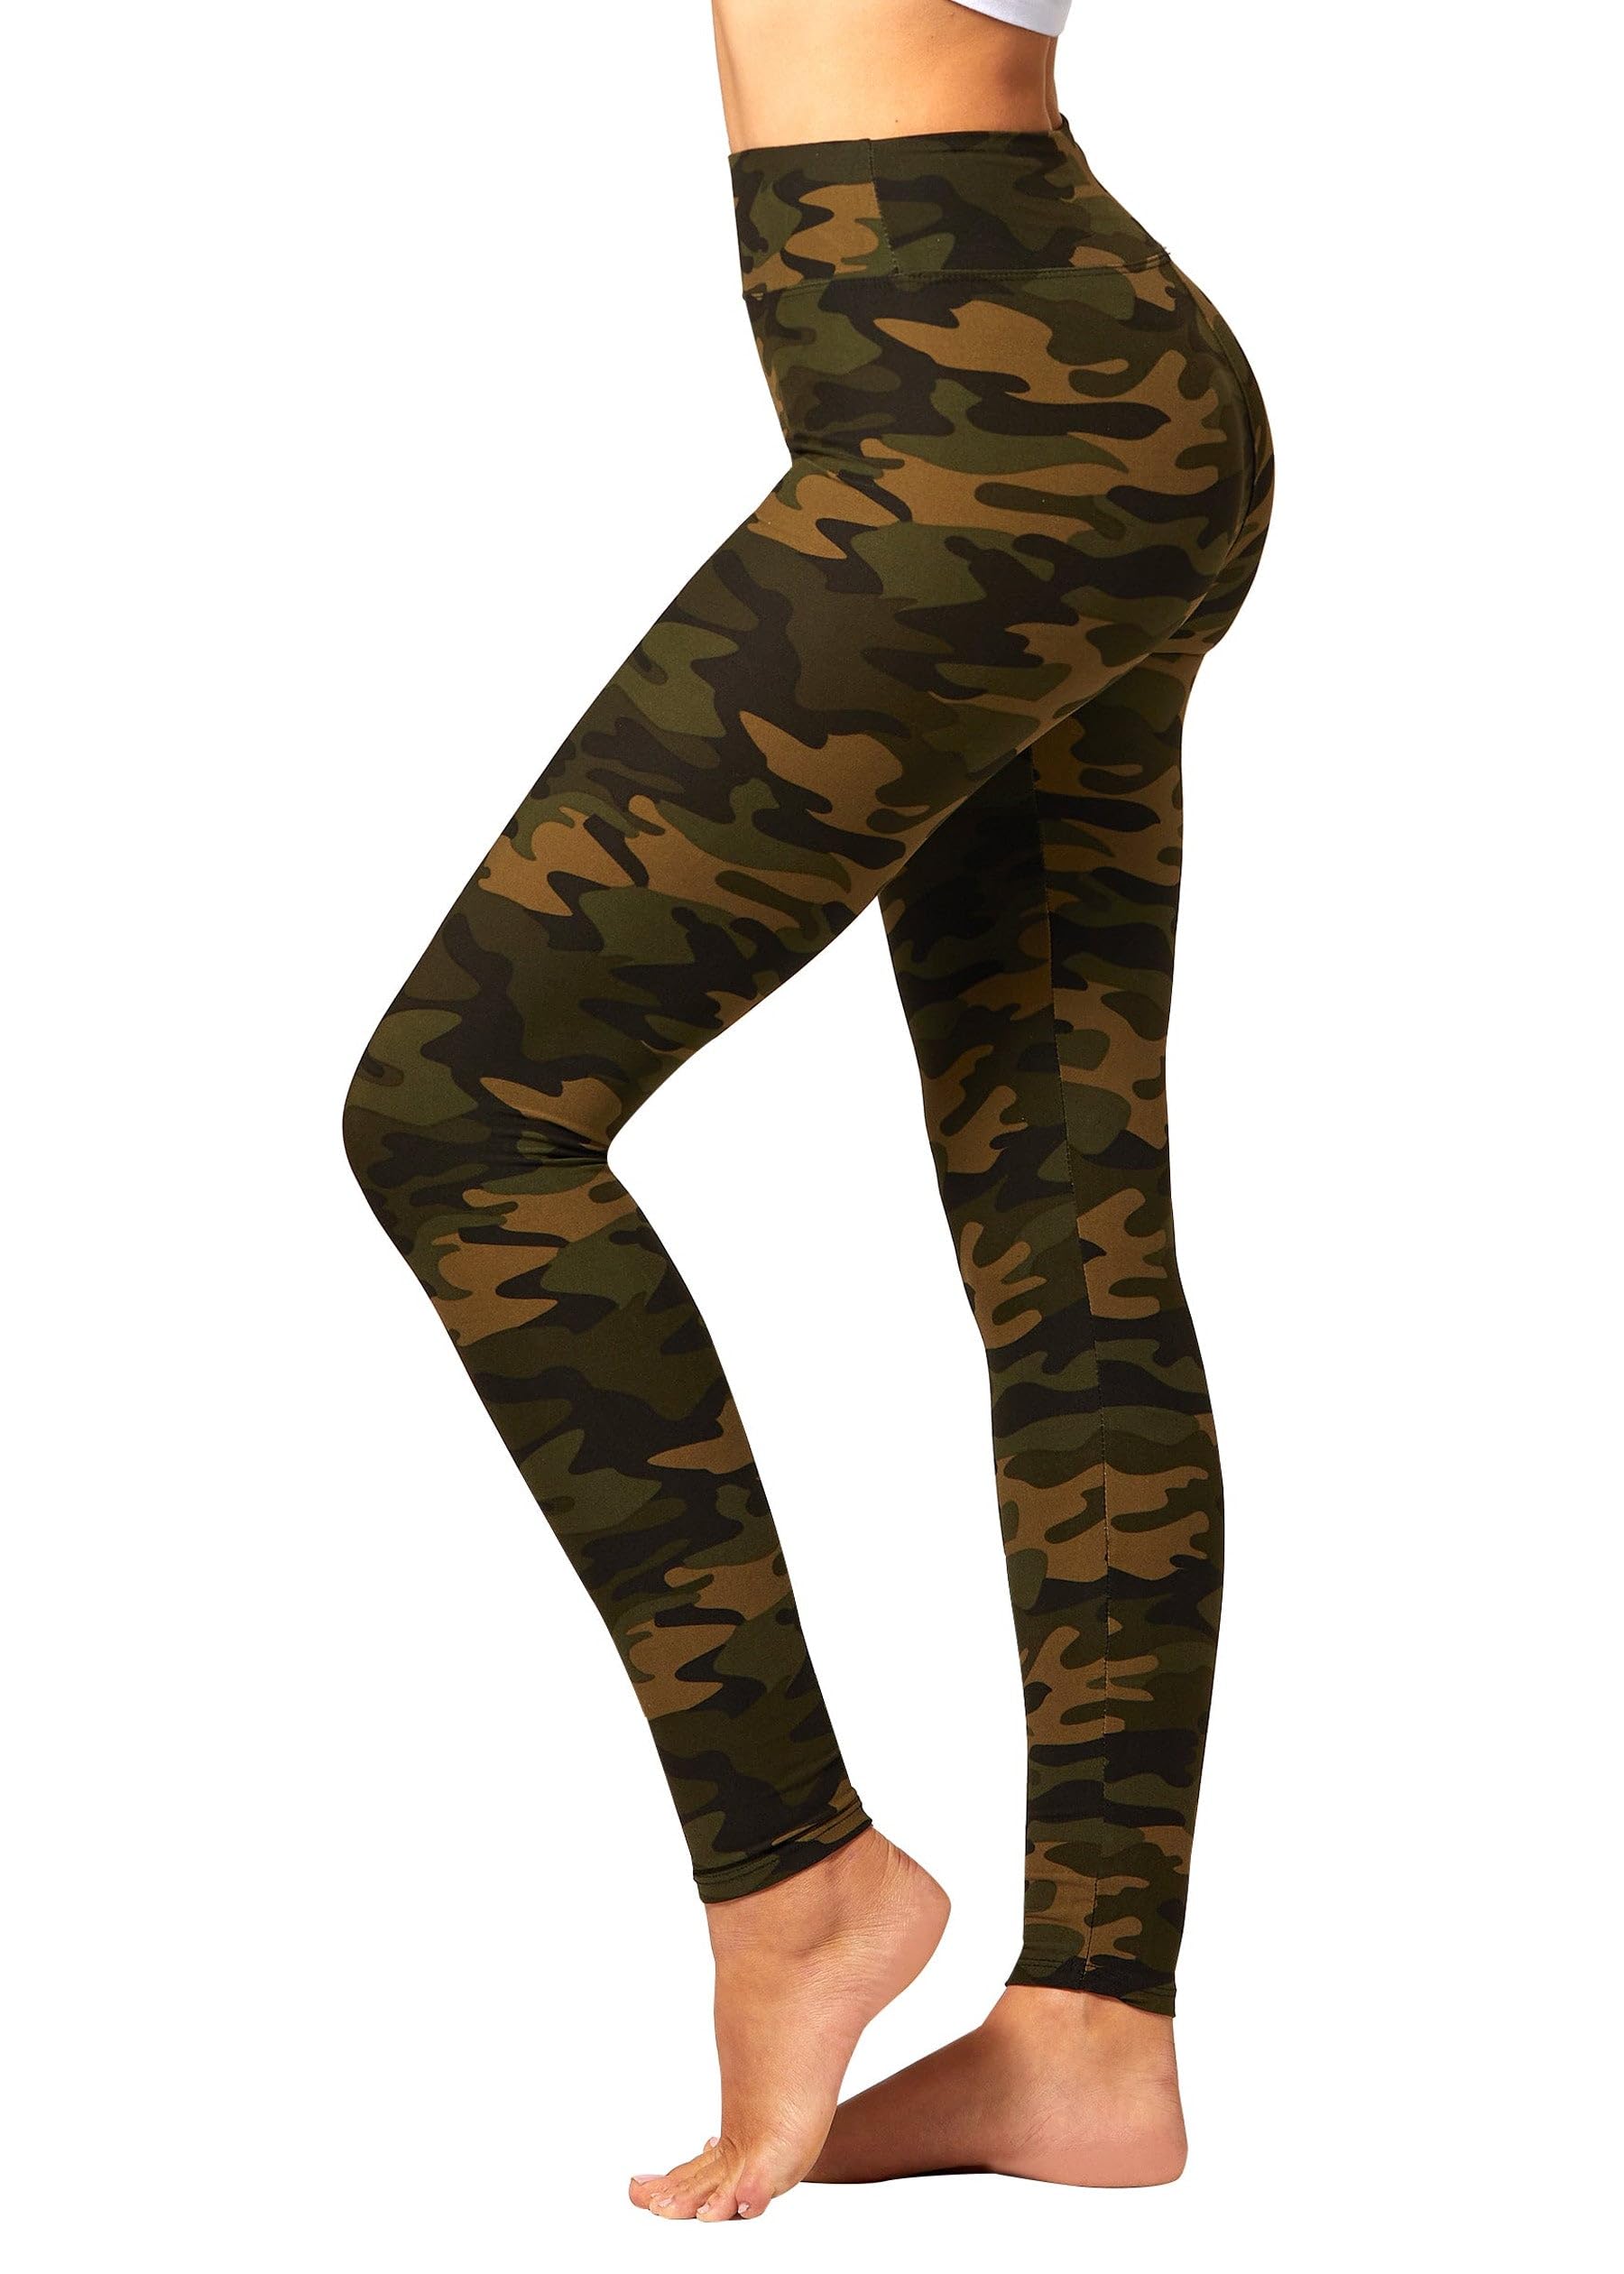 Conceited Camo Print Premium Ultra Soft High Waisted Leggings